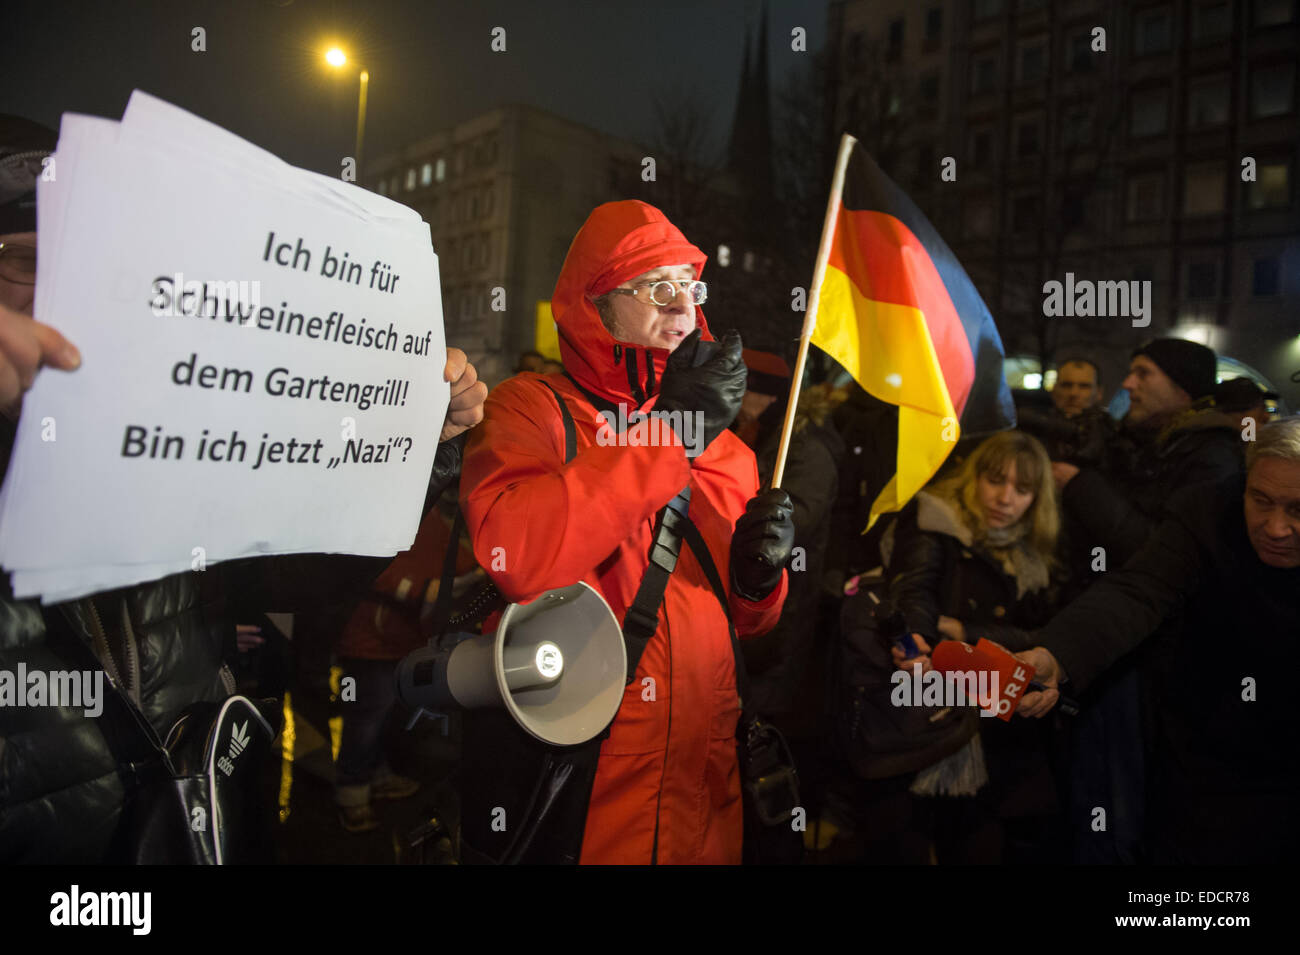 Berlin, Germany. 5th Jan, 2015. Followers of the movement 'Baergida' (Berlin Patriots against the islamization of the Occident) protest in Berlin, 5 January 2015. Right-wing initiative PEGIDA (Patriotic Europeans against the Islamization of the Occident) organizes protests against the alleged foreign infiltration in several citys. Several organizations announced ounterdemonstrations in Berlin. FOTO: BERND VON JUTRCZENKA/DPA/Alamy Live News Stock Photo